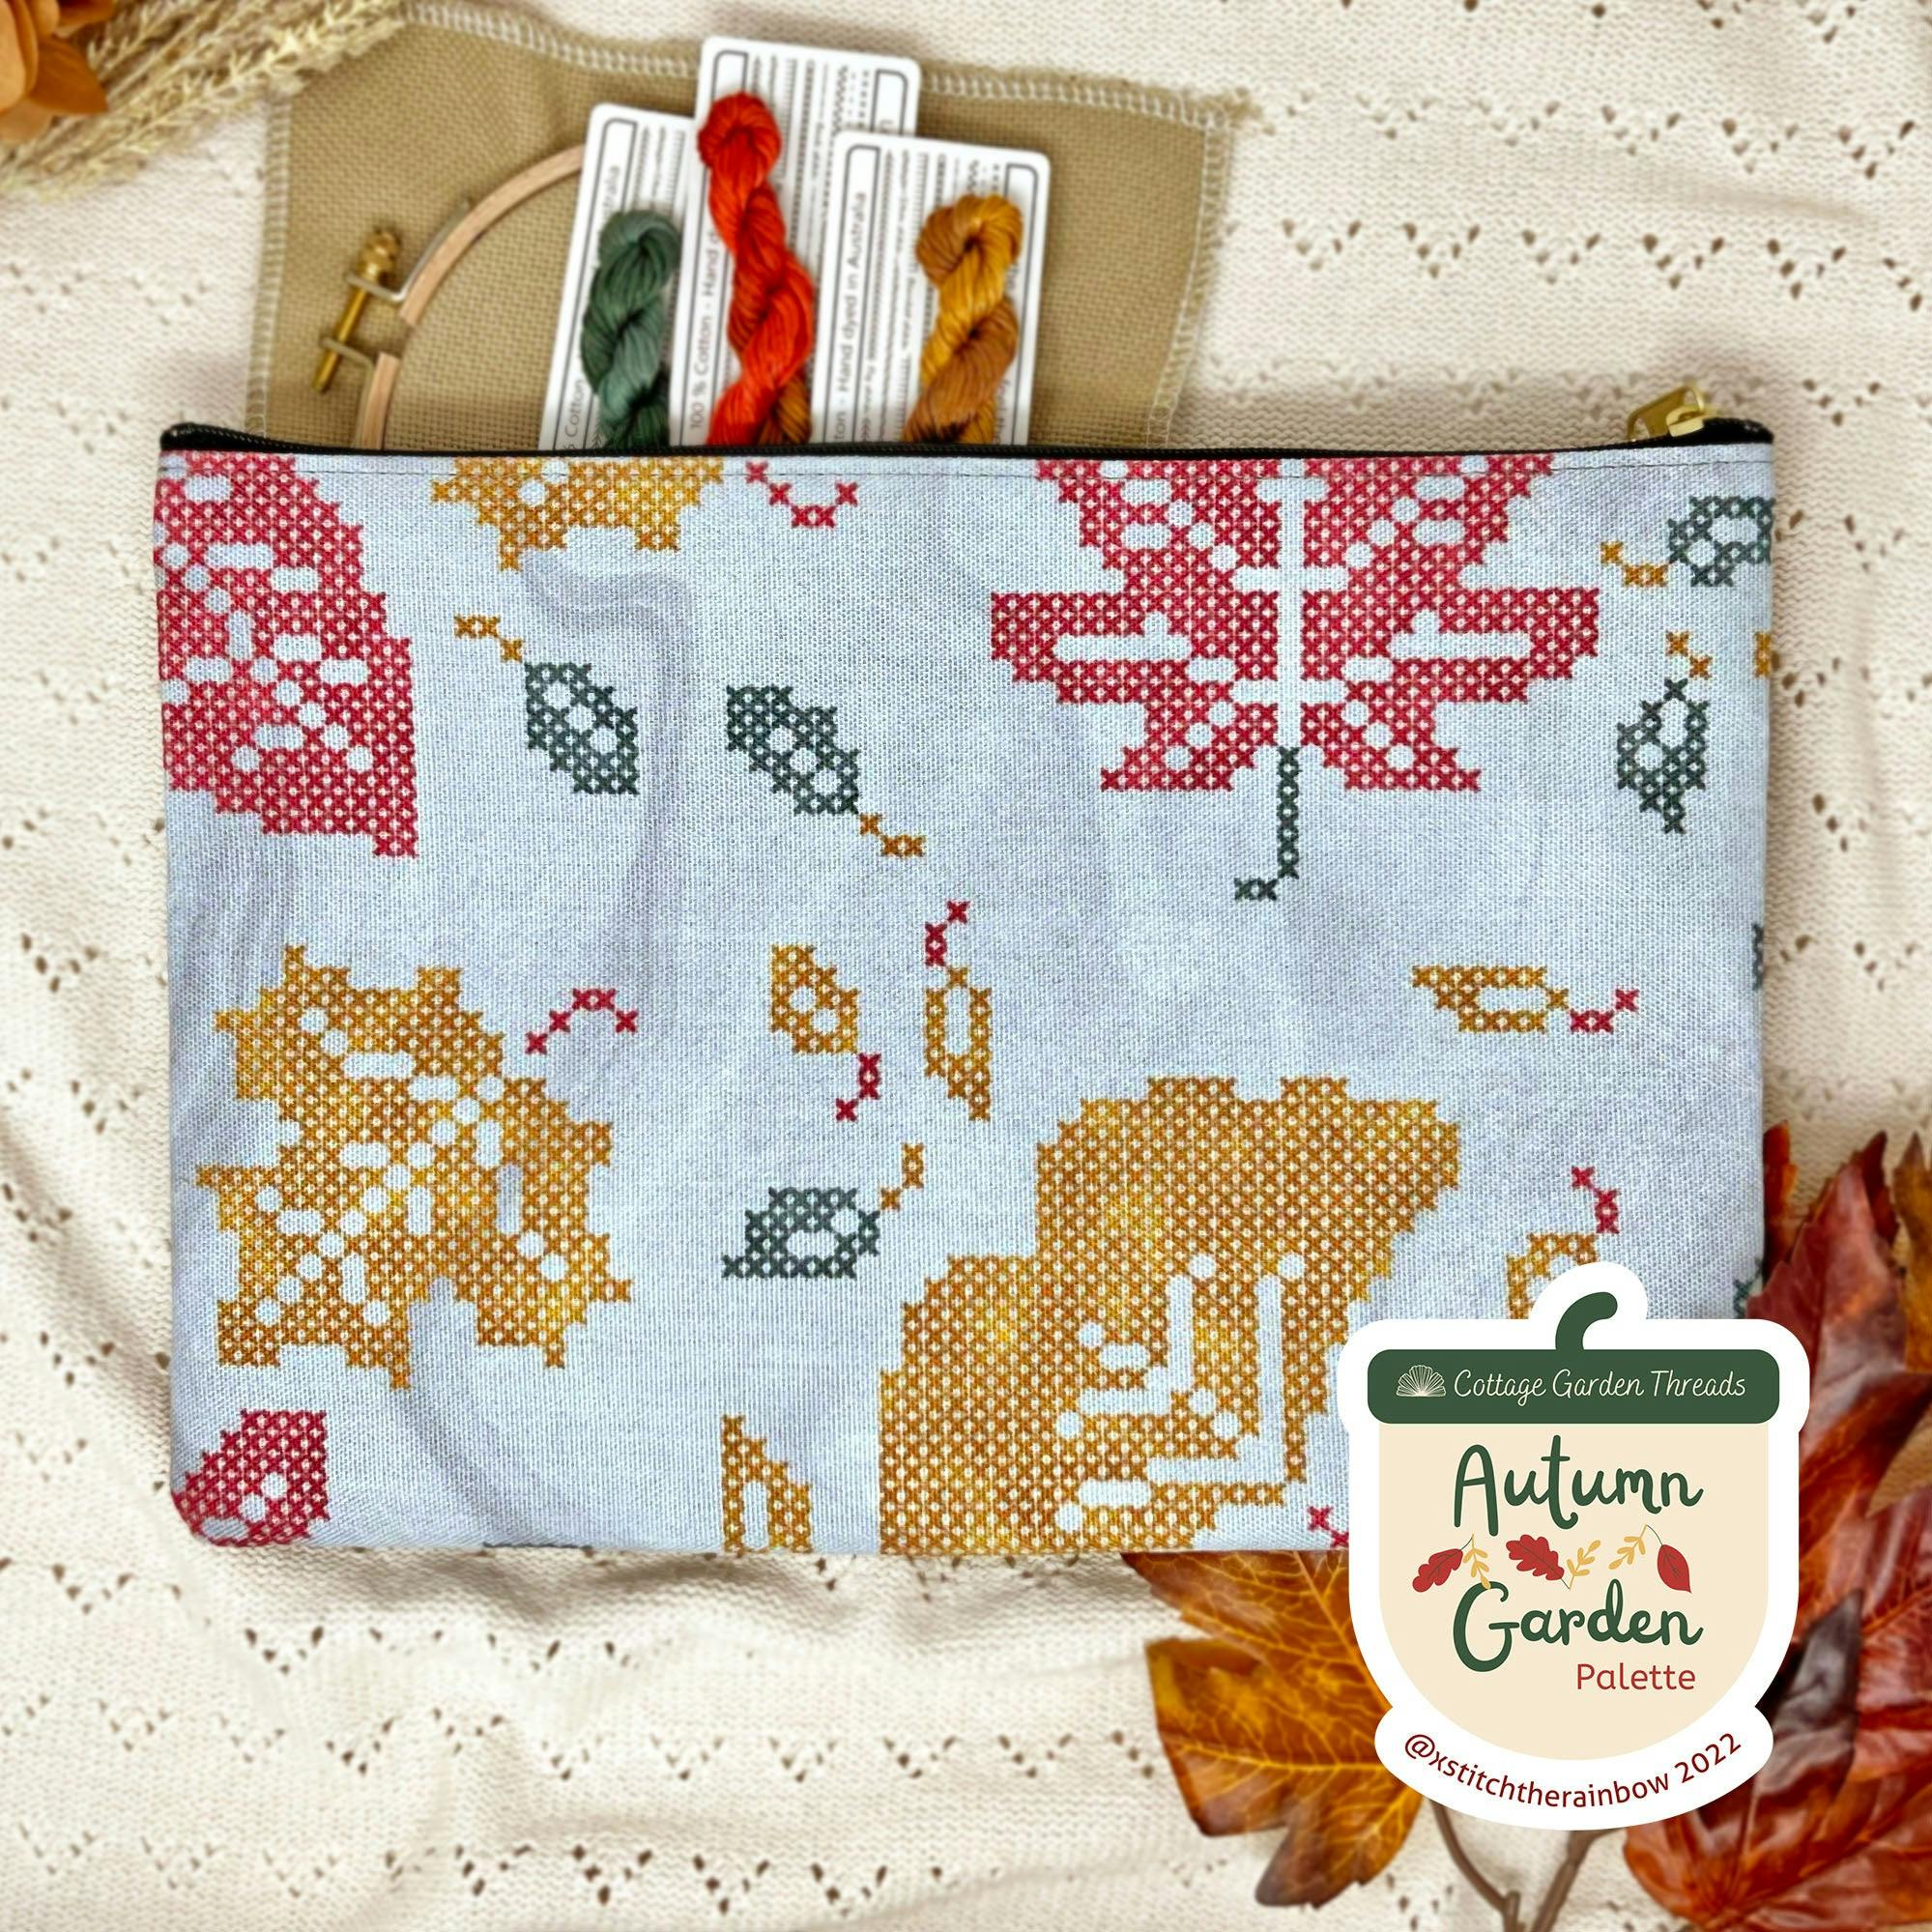 Project Bag For Cross Stitch, Embroidery, Needlework - Stitch Bag